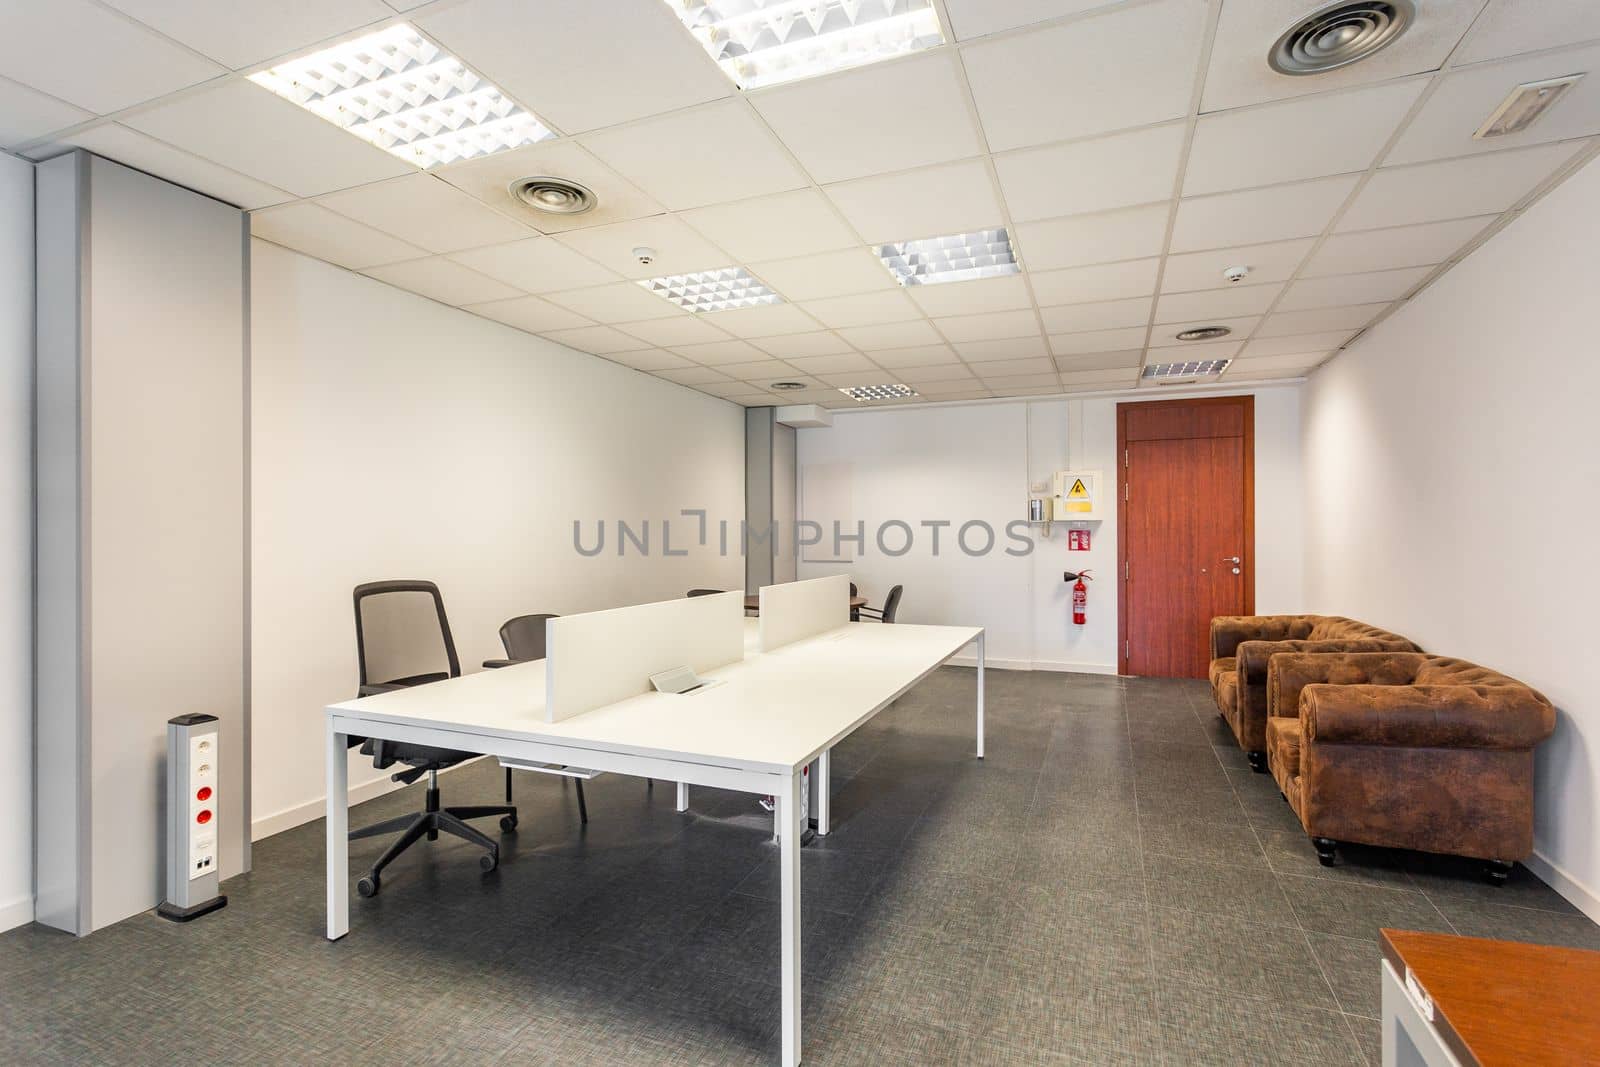 Large conference room with tiled floor and bright lamps on the unfashionable ceiling. Along the walls are outdated armchairs with worn upholstery. by apavlin